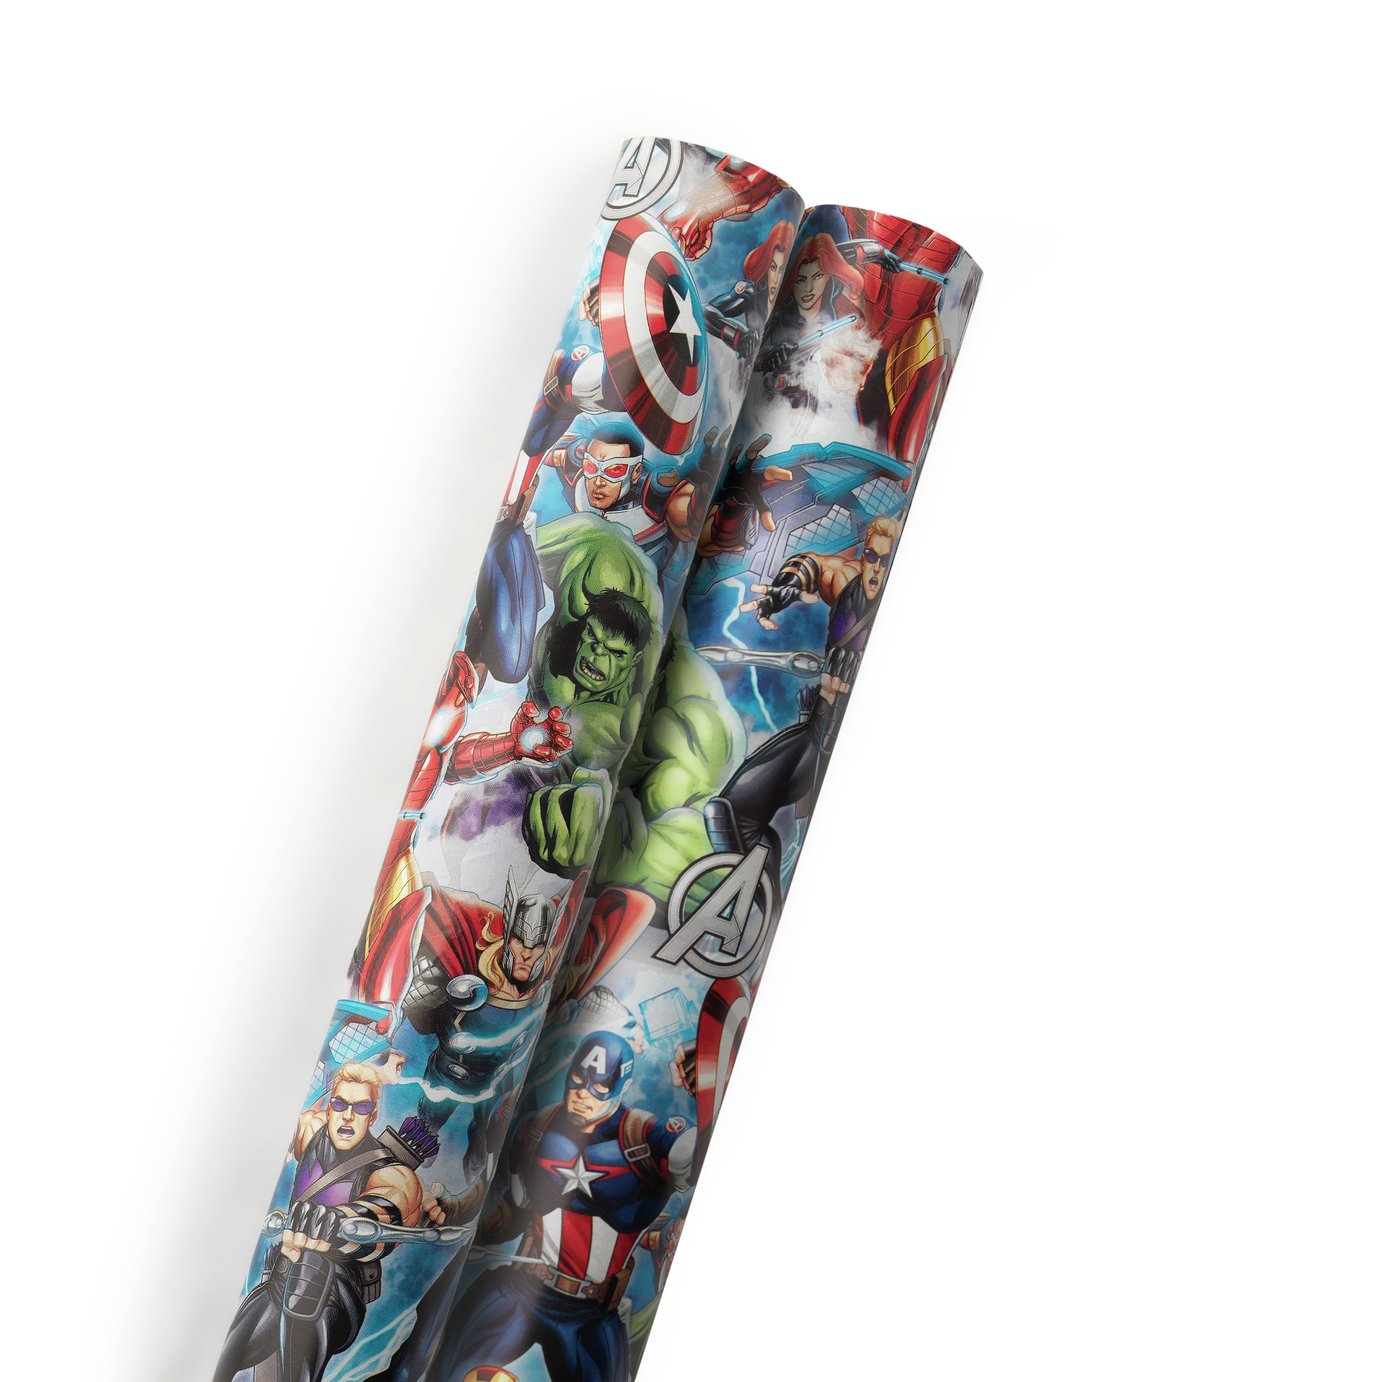 Avengers 2 Piece Wrapping Paper Set - 3m